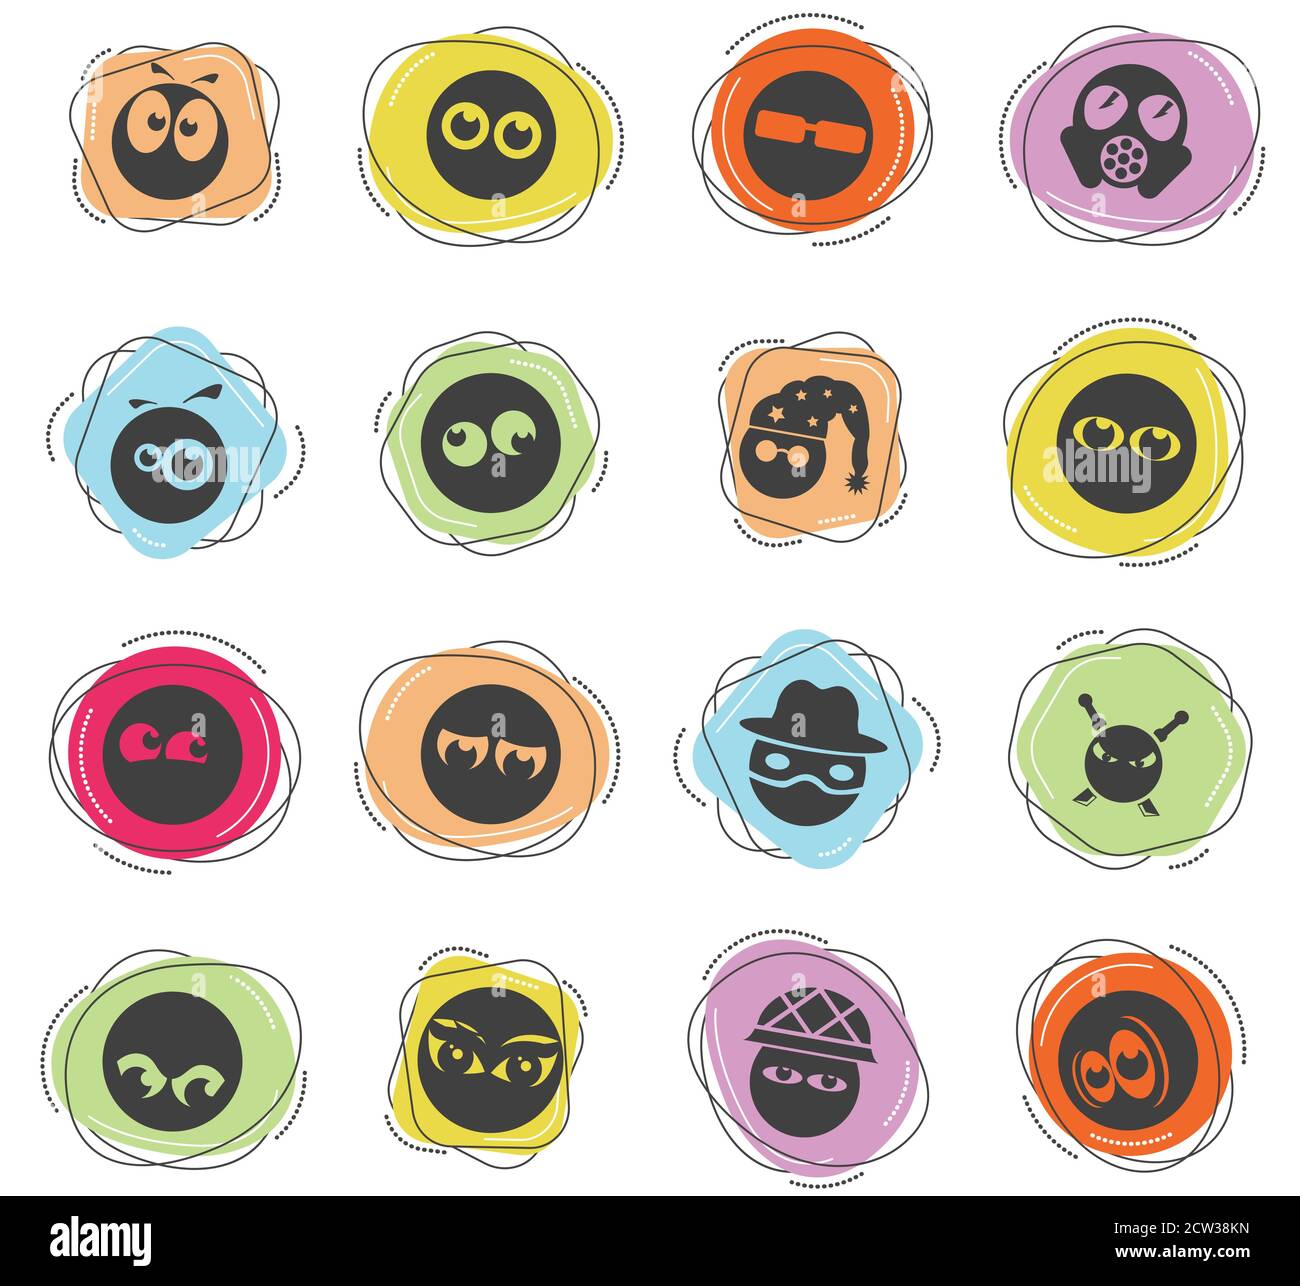 Emotions and glances icons Stock Vector